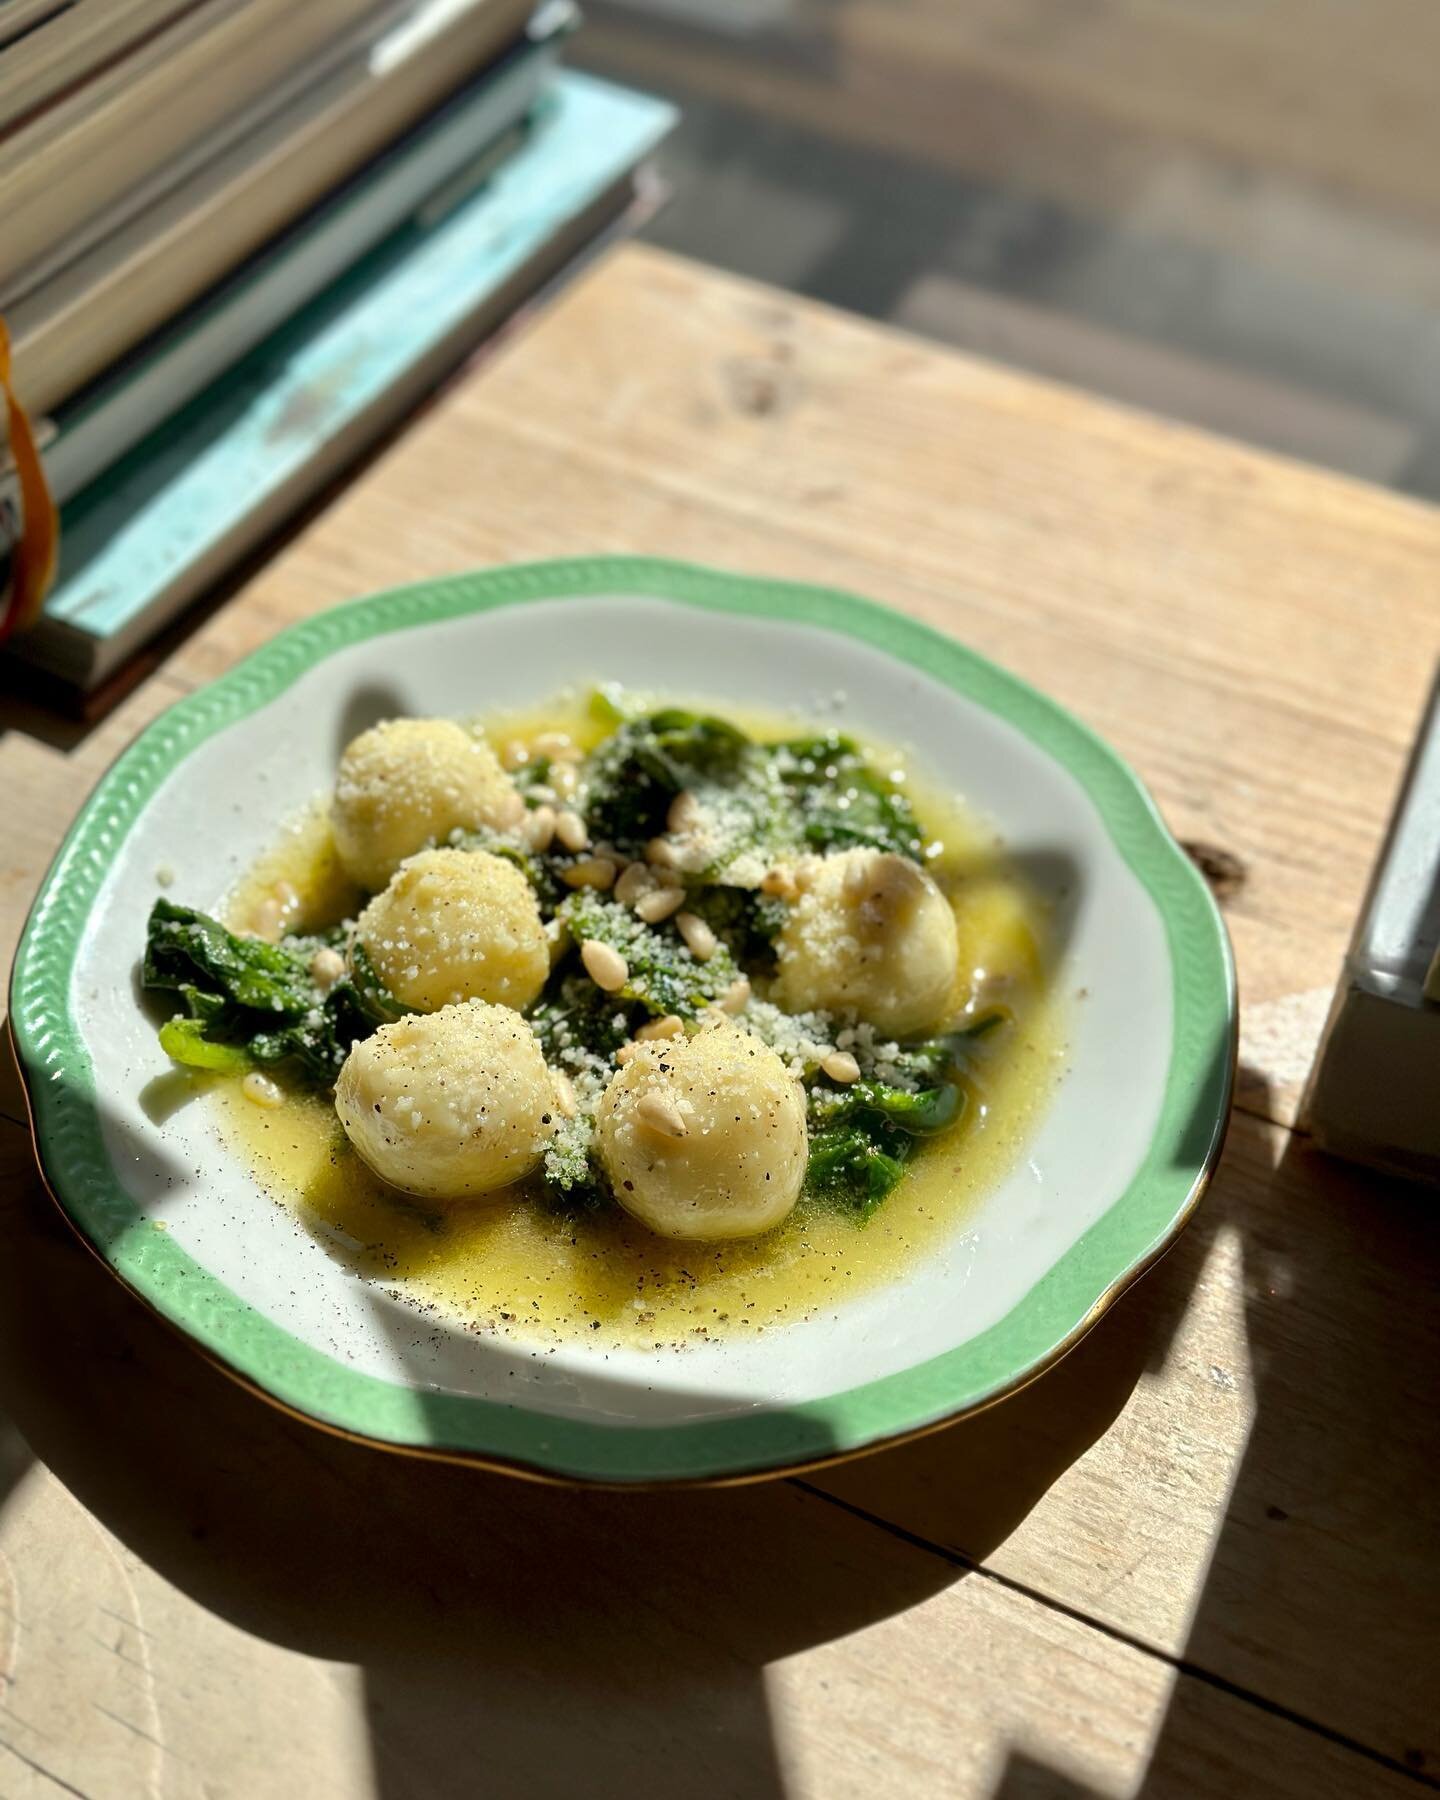 Friday at last, and at last, lunch again! Come on by between 12-14! 
- Gnudi, ramson, spinach, pine nuts 
- Spring vegetables salad with green goddess dressing, cucumber, potato, rhubarb, asparagus 
- Mataburro (finally in Sweden thanks to @vinvoyou 